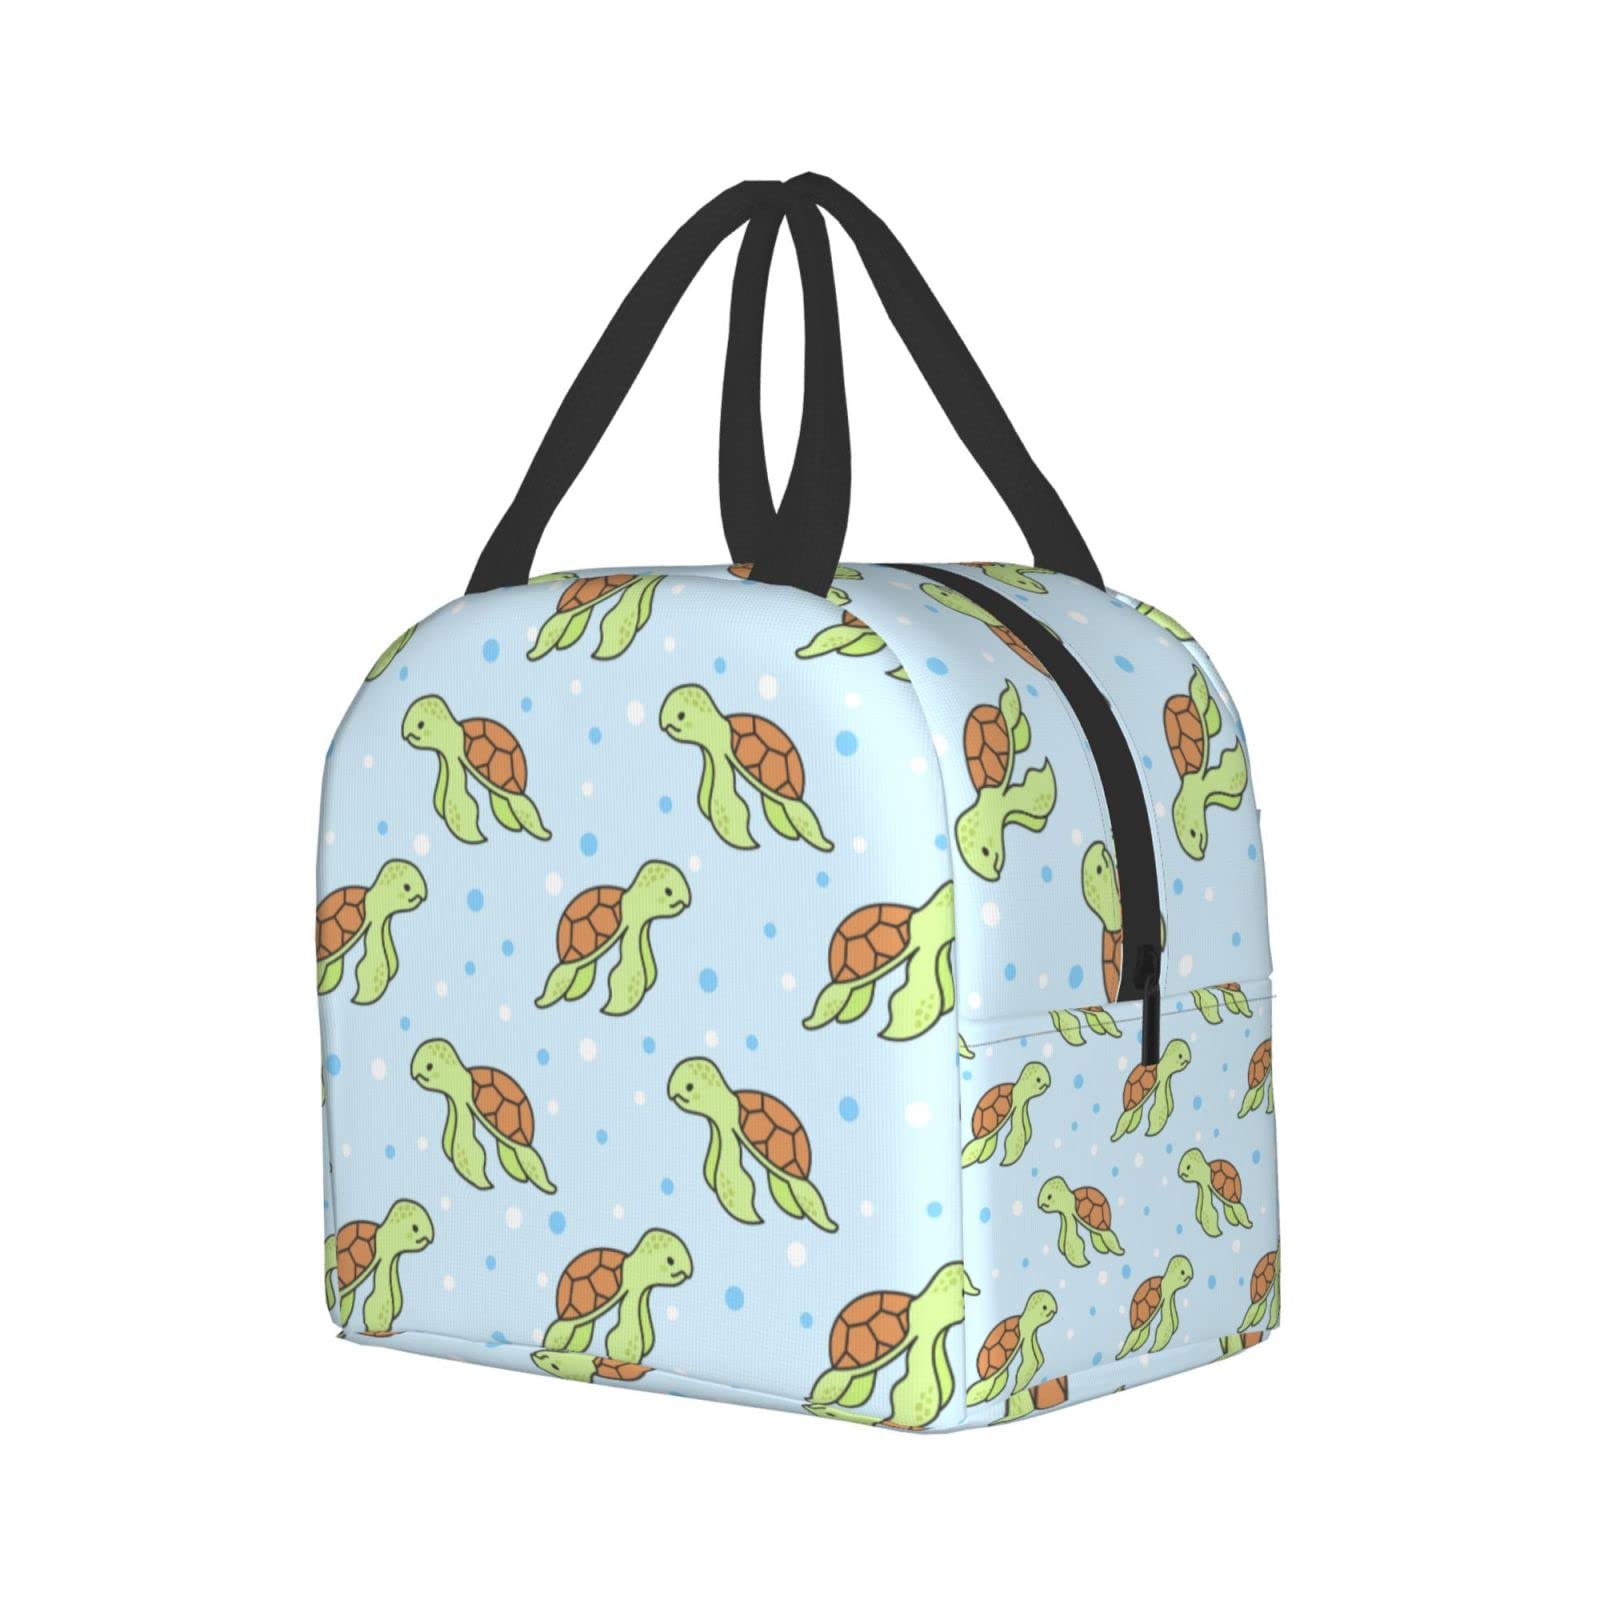 Ucsaxue Cute Turtle Lunch Bag Travel Box Work Bento Cooler Reusable Tote Picnic Boxes Insulated Container Shopping Bags For Adult Women Men Boys Girls